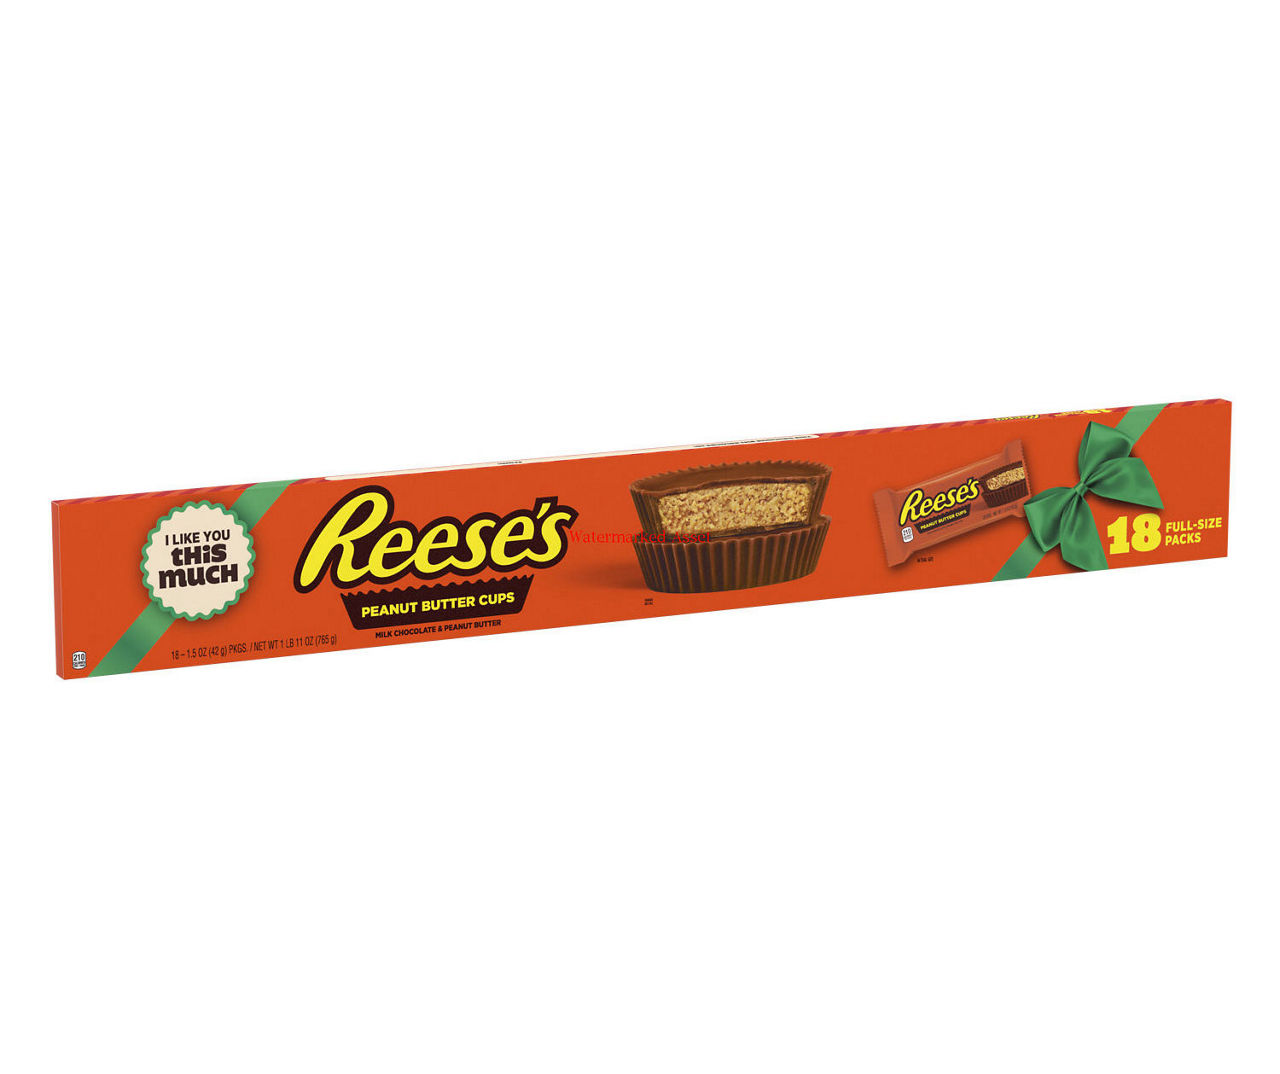 REESE'S THiNS Milk Chocolate Peanut Butter Cups Christmas Candy